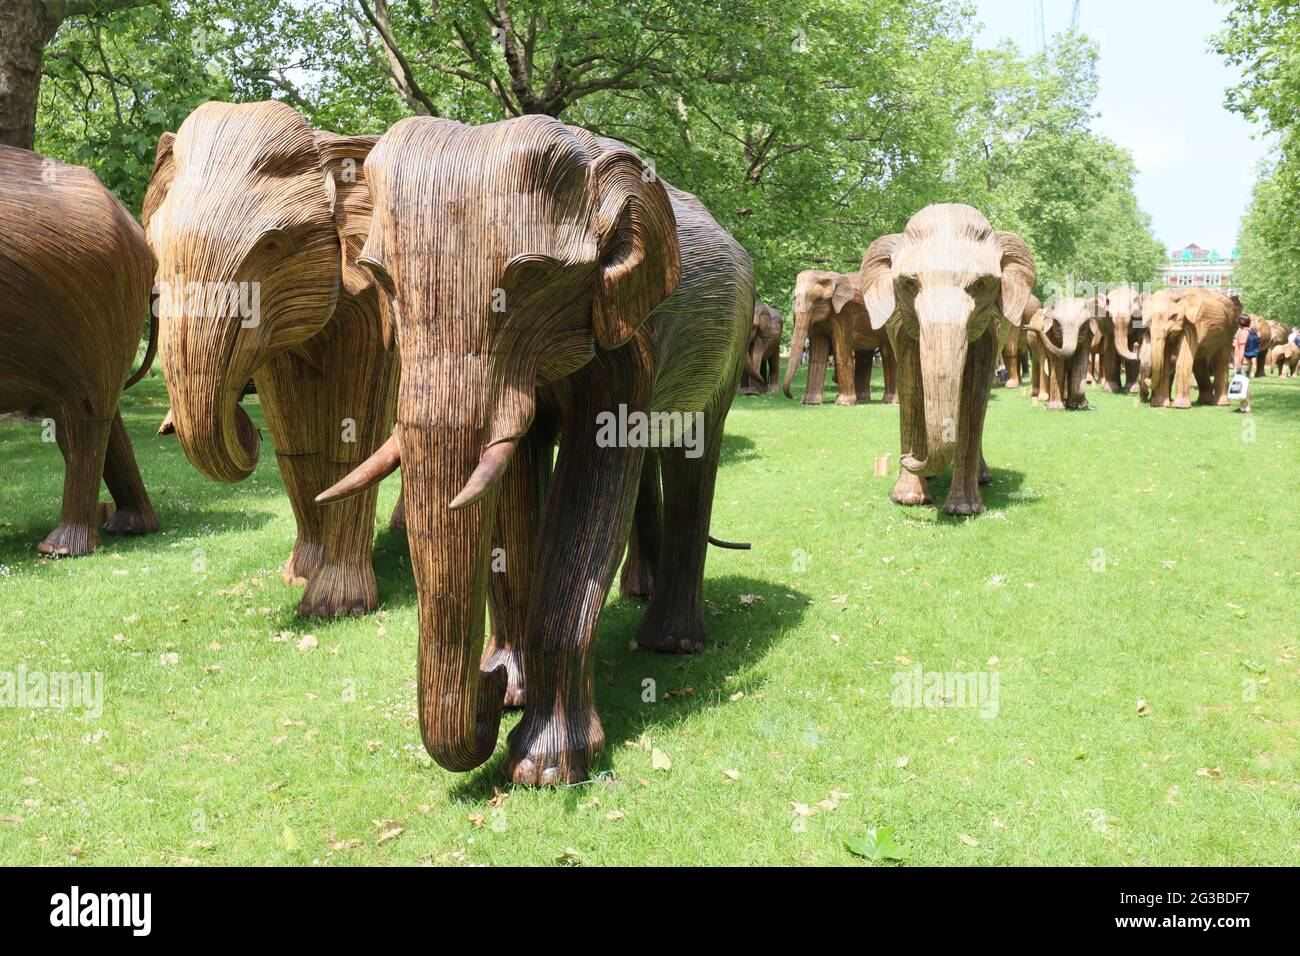 Non Exclusive: A magnificent herd of handcrafted life-size elephants roaming in the Royal Parks, made using Lantana camara, a natural plant material, Stock Photo